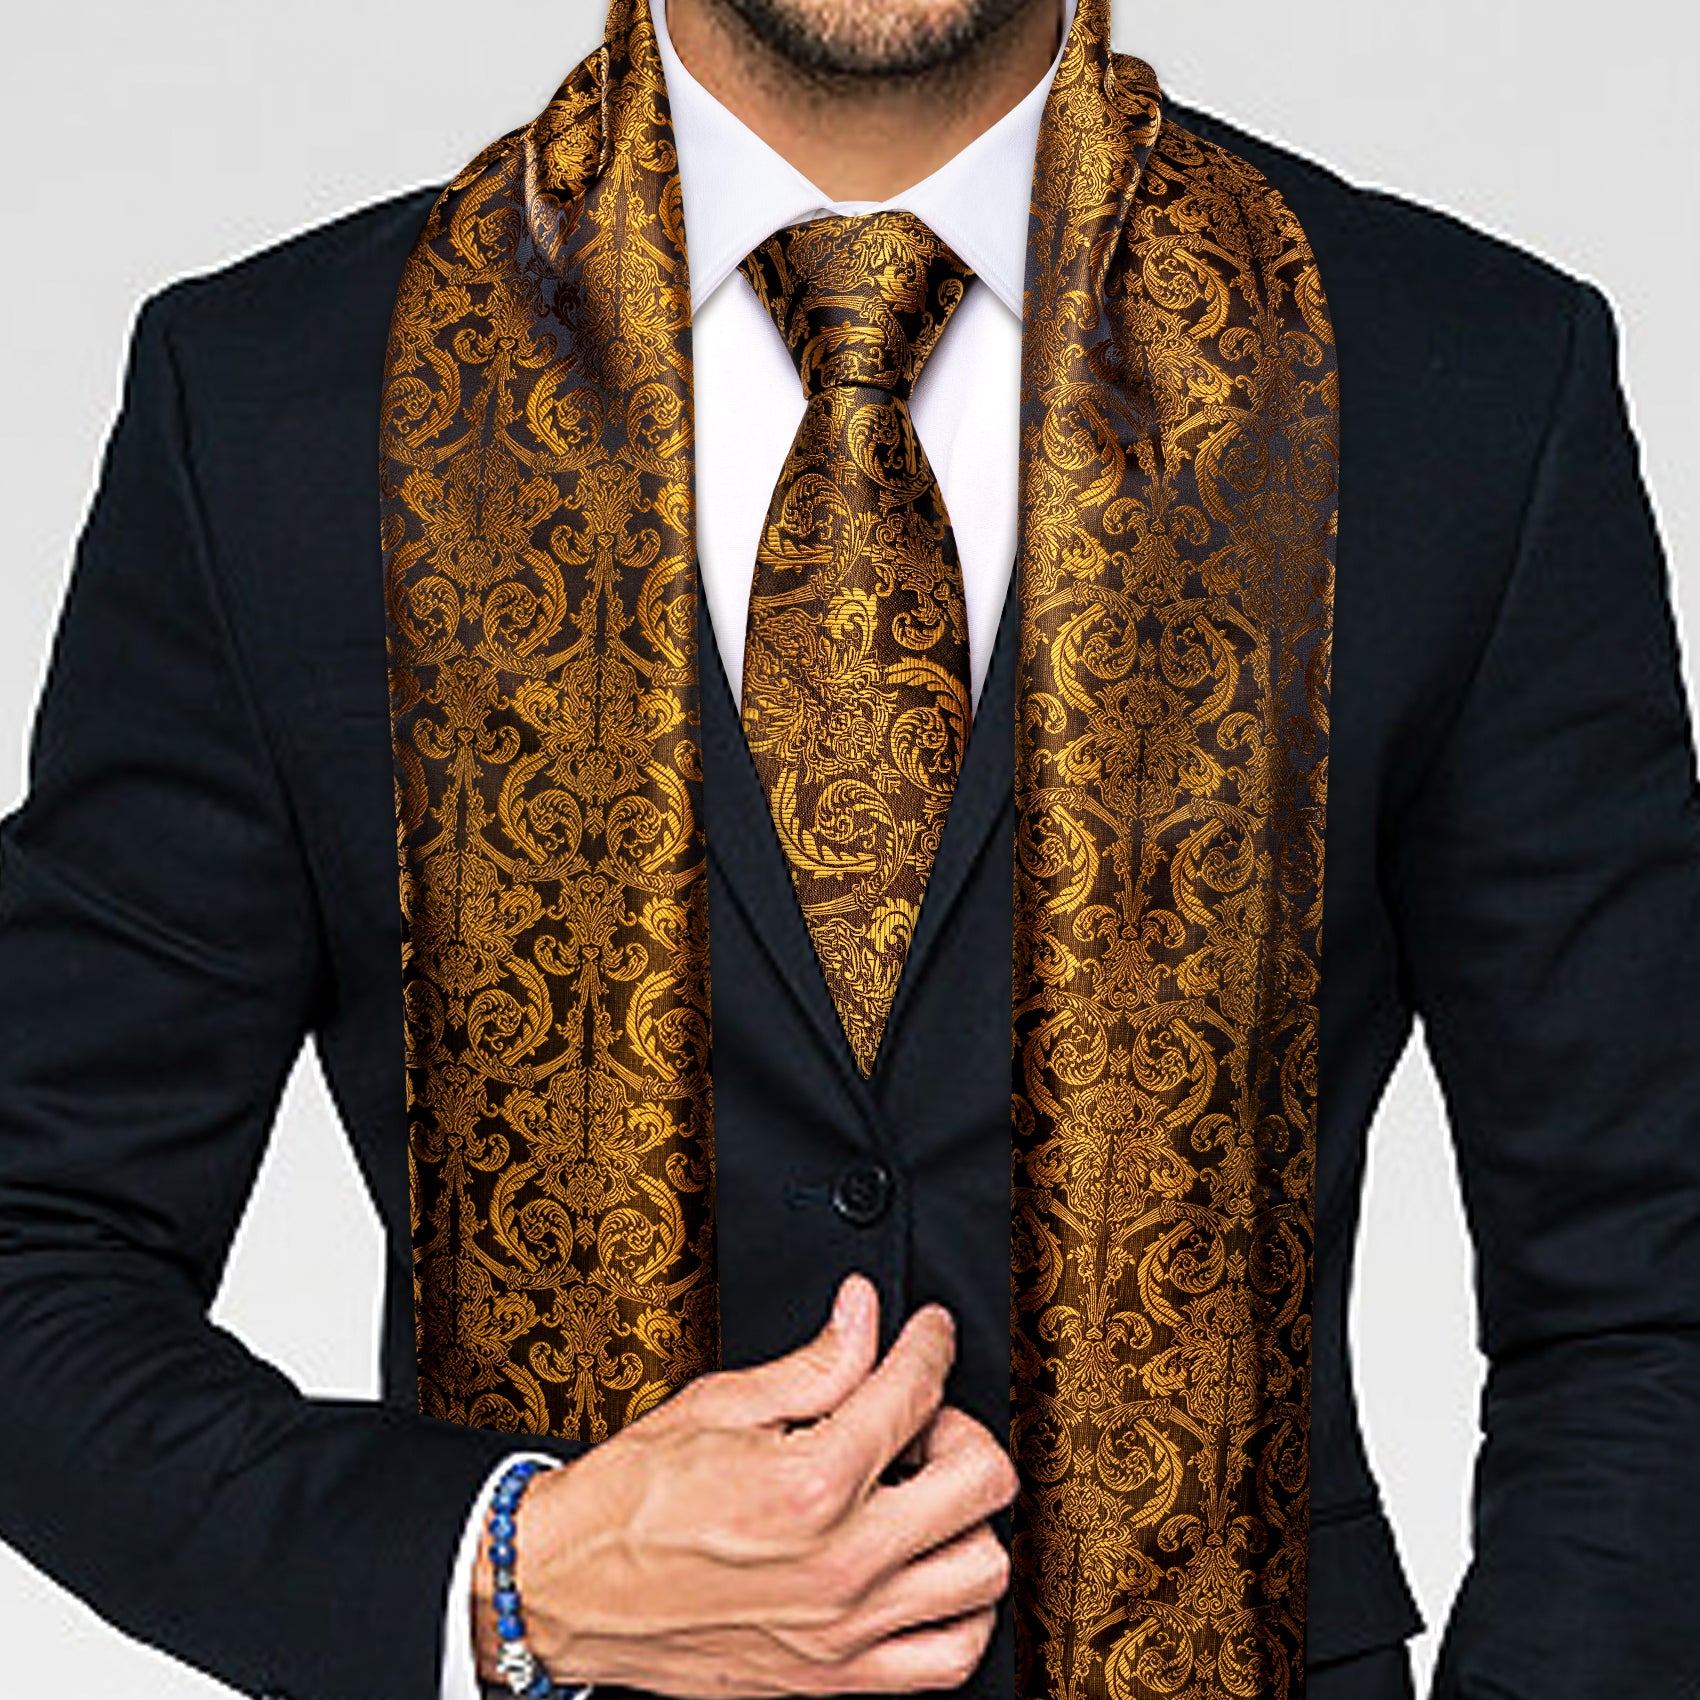 Paisley Scarf in Black – The Good Collective